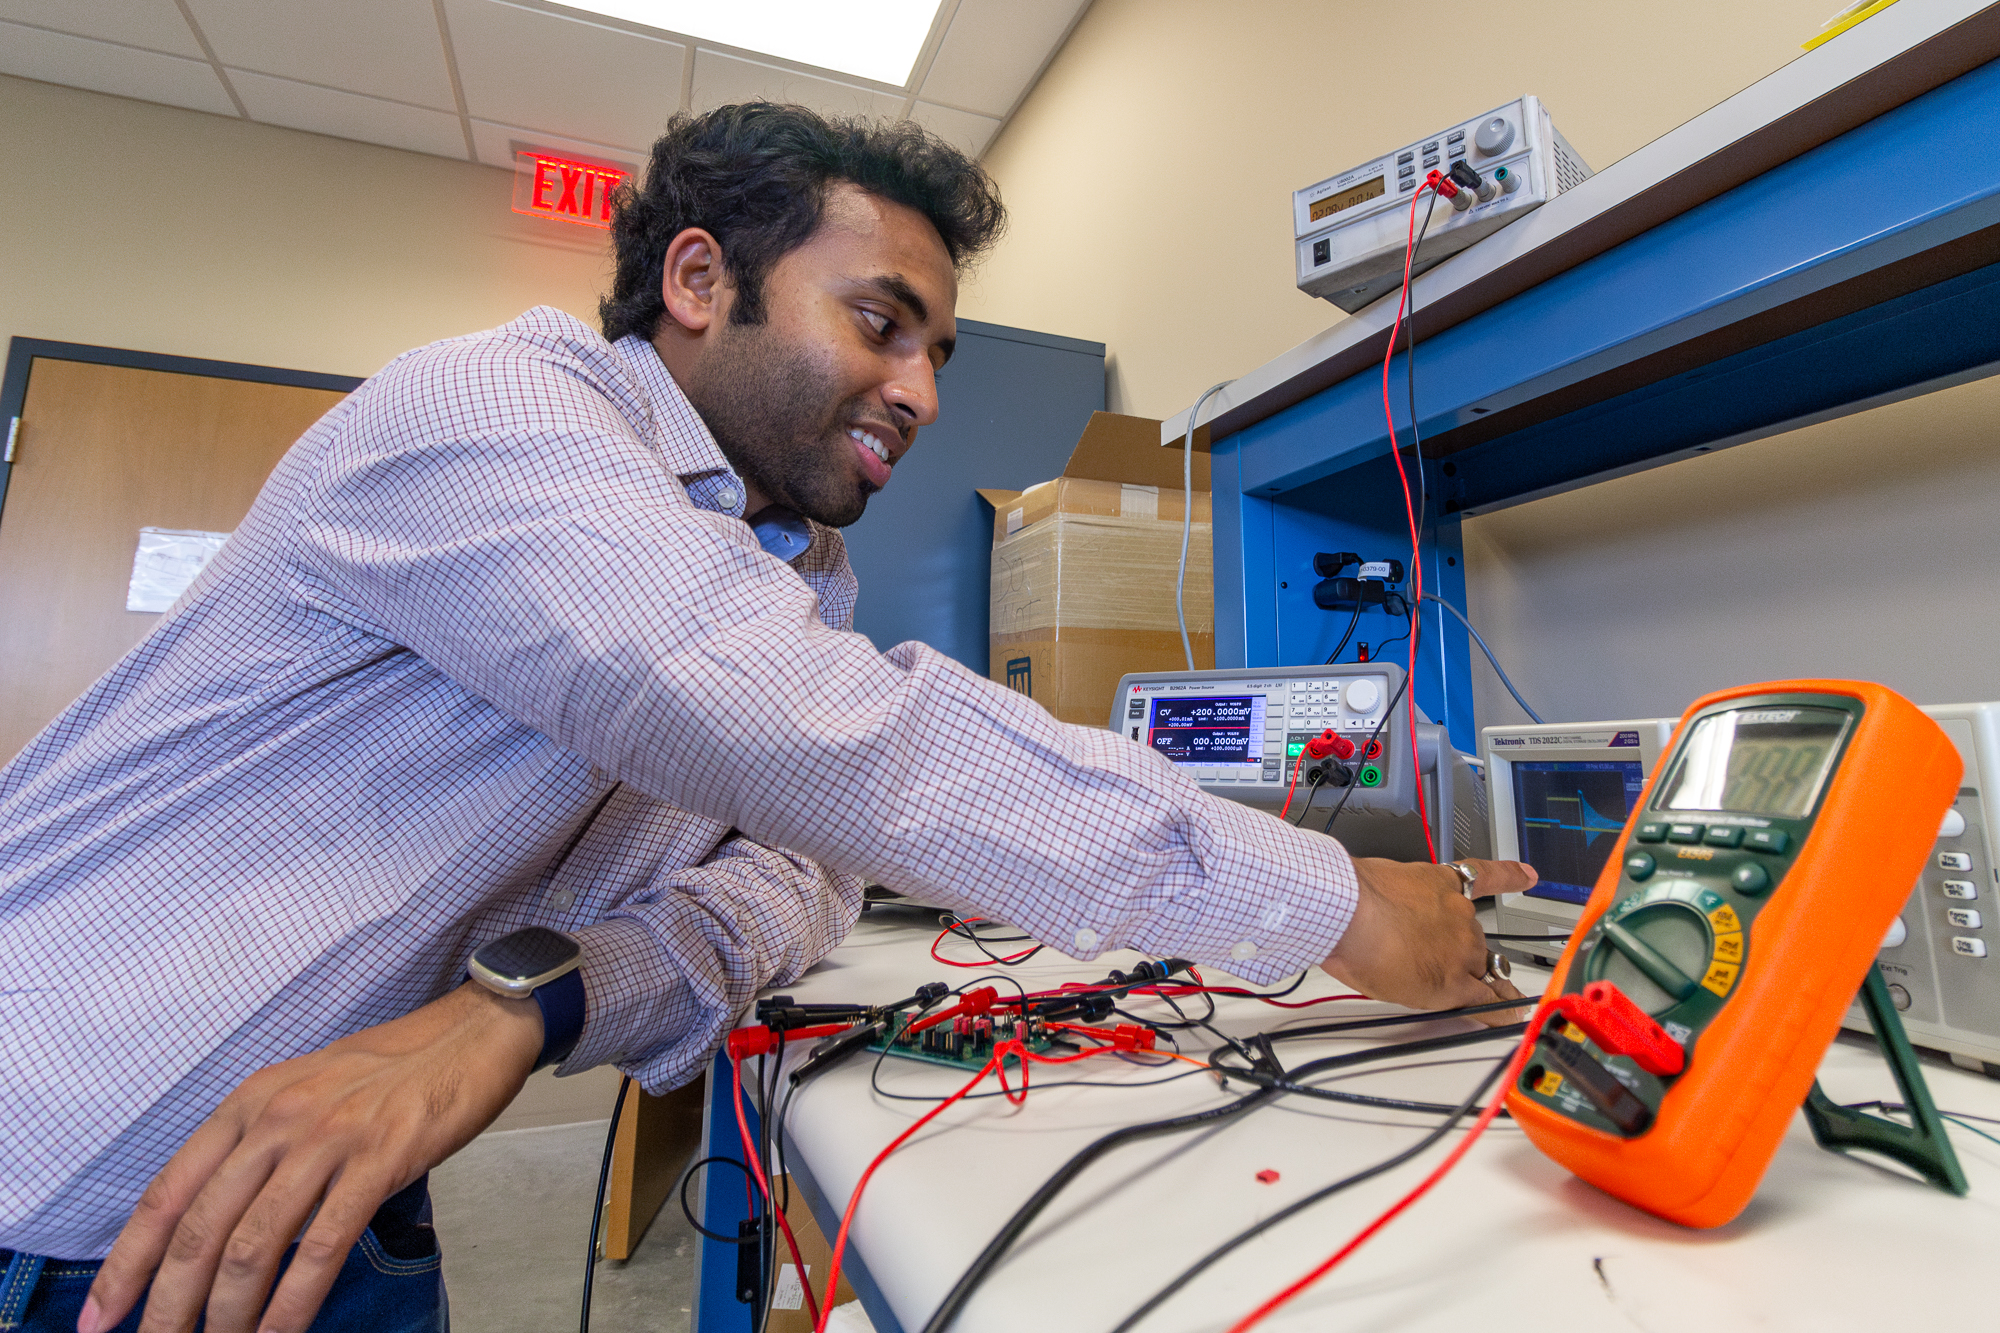 Frontier Center Scholar Sumit Saha, from IIT Bombay and advised by Ohio State PI Nima Ghalichechian, works in Ohio State's ElectroScience Laboratory on the project Integration of Zero-Leakage NEMS Switch With a Flexible Antenna for RF Energy Harvesting.